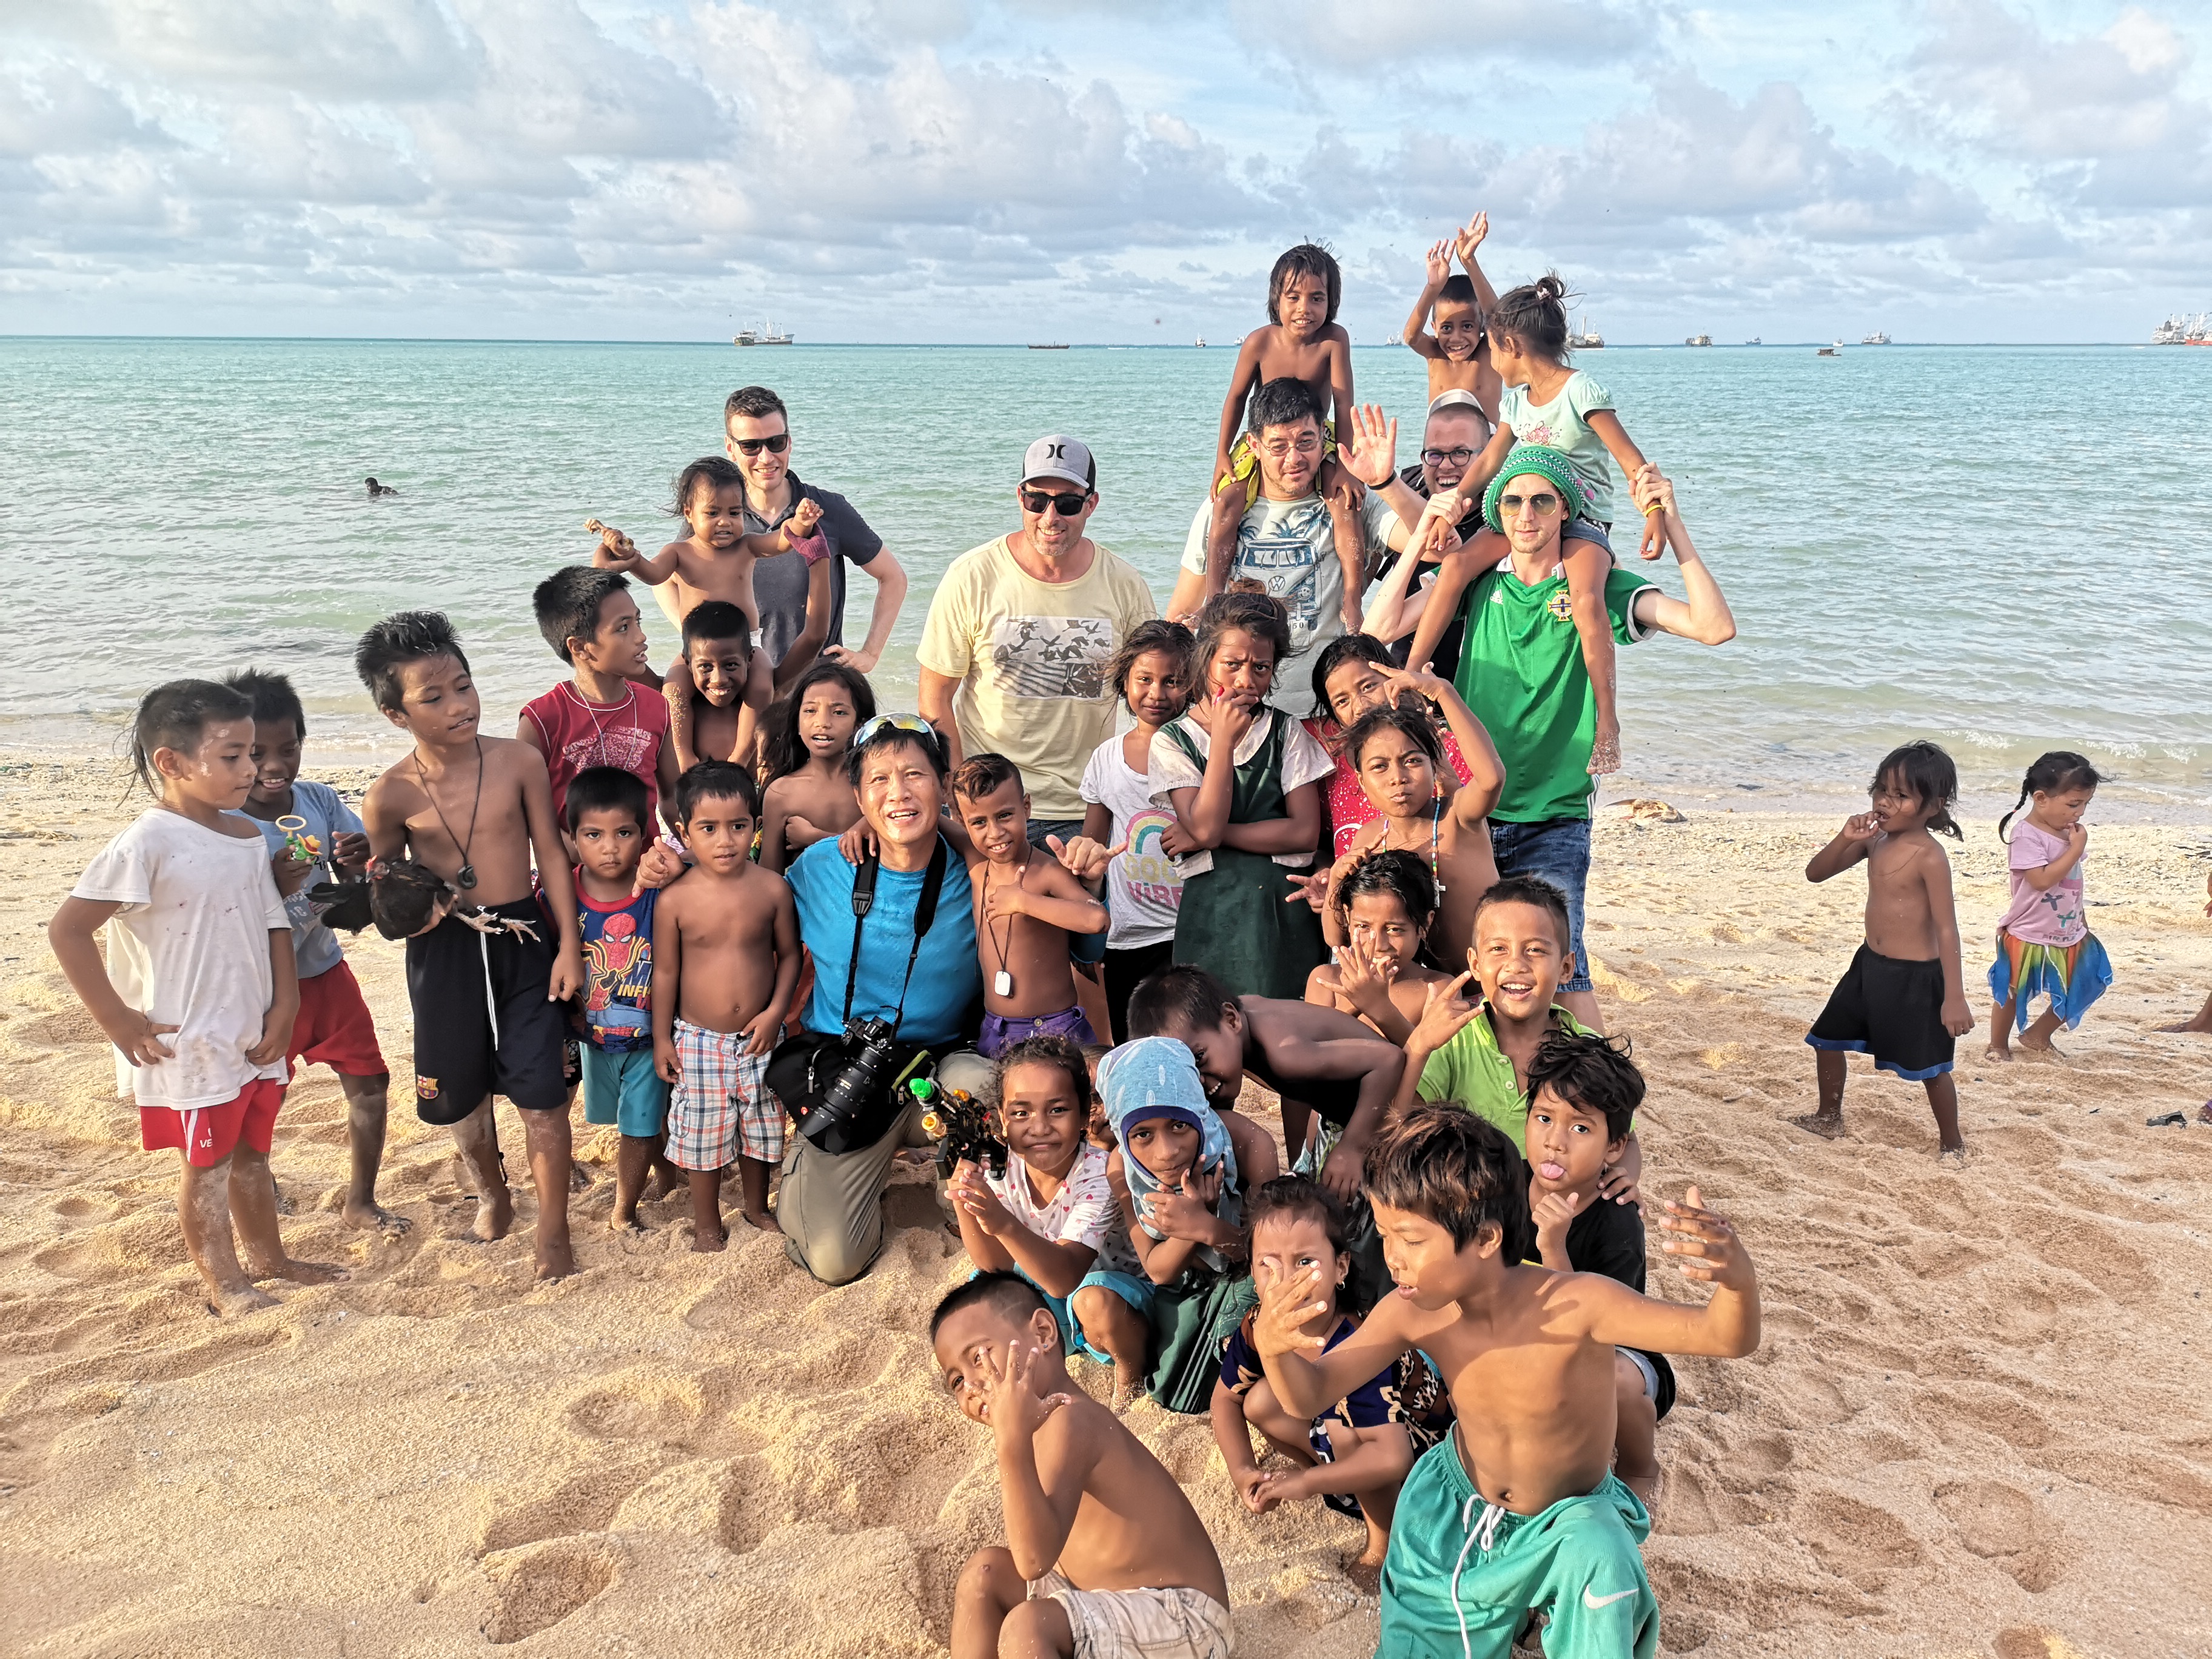 Our group mingling with kids in South Tarawa